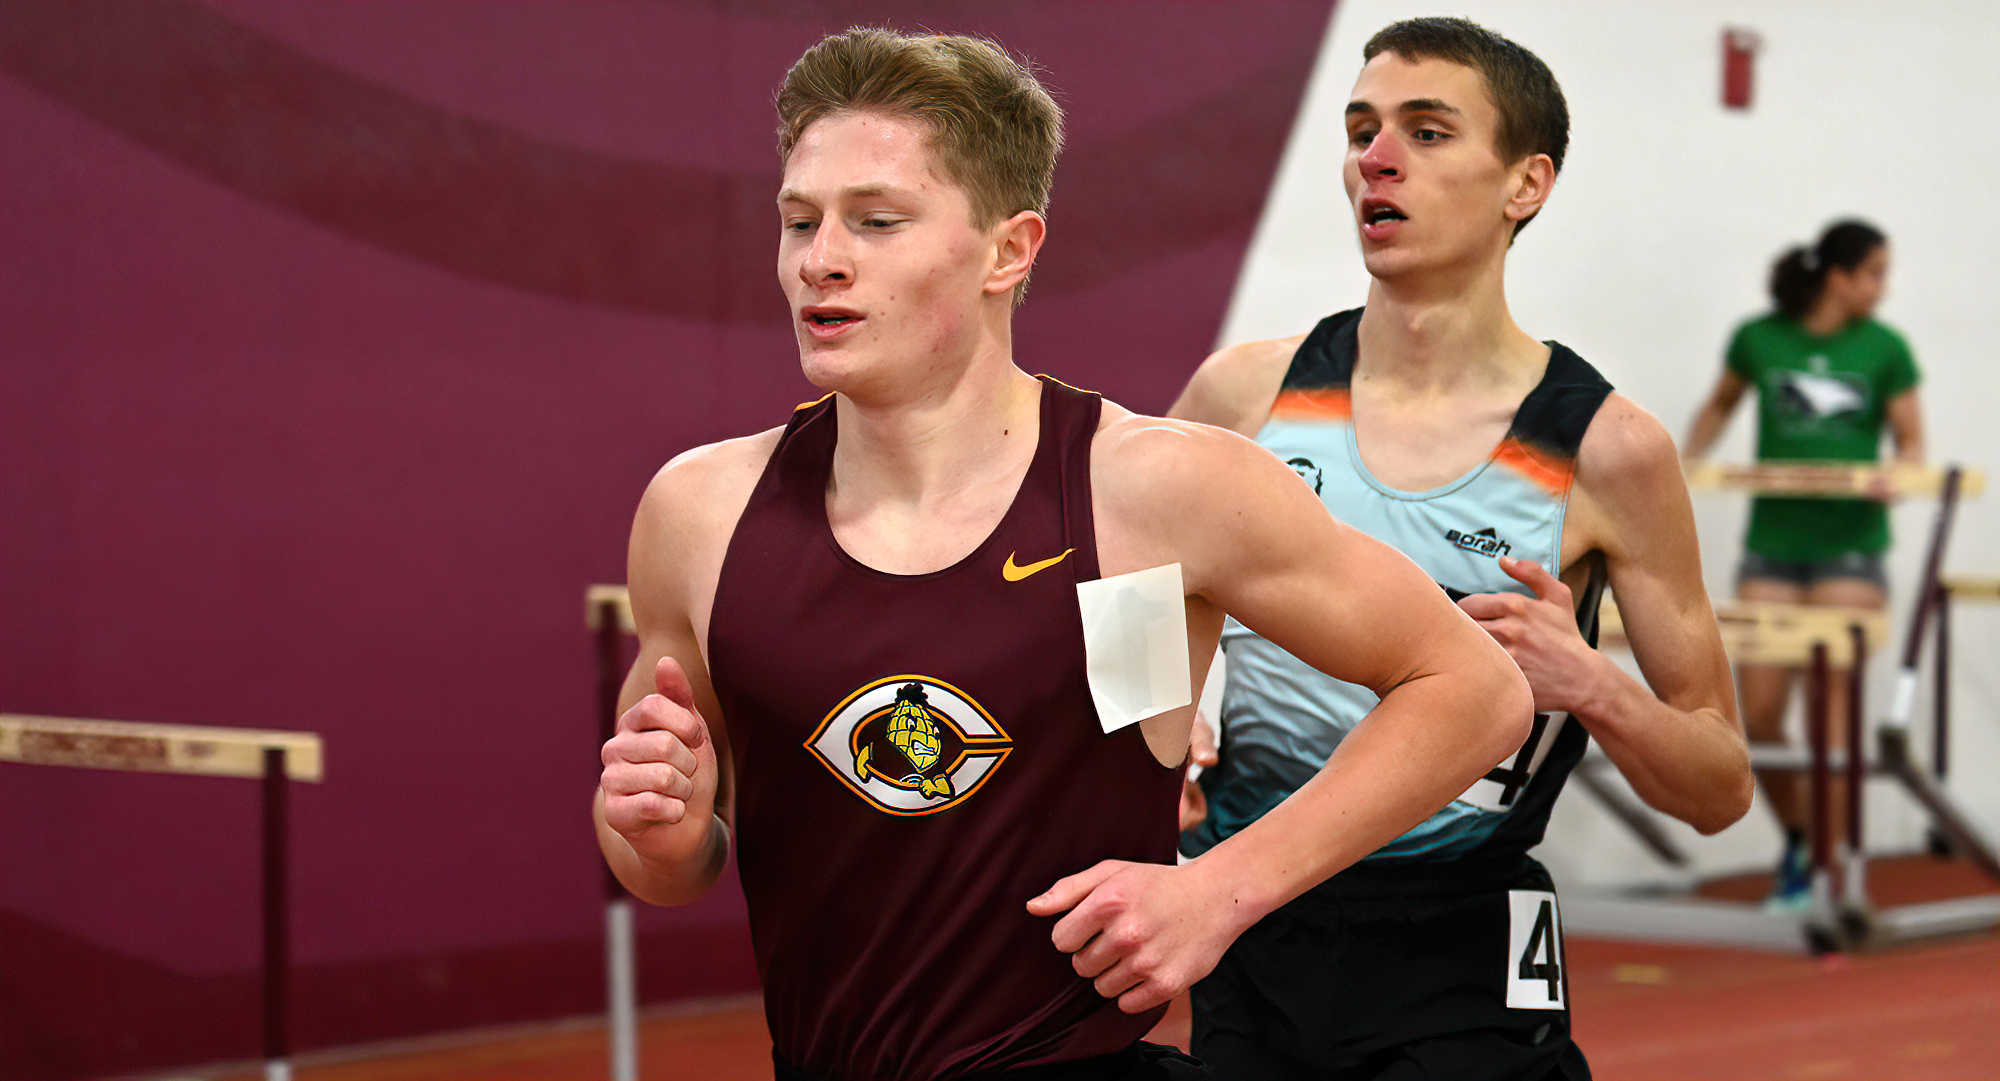 First-year runner Brady Goss was the lone event winner for the Cobbers at the UND Open. It was his second straight week with a distance-race win.